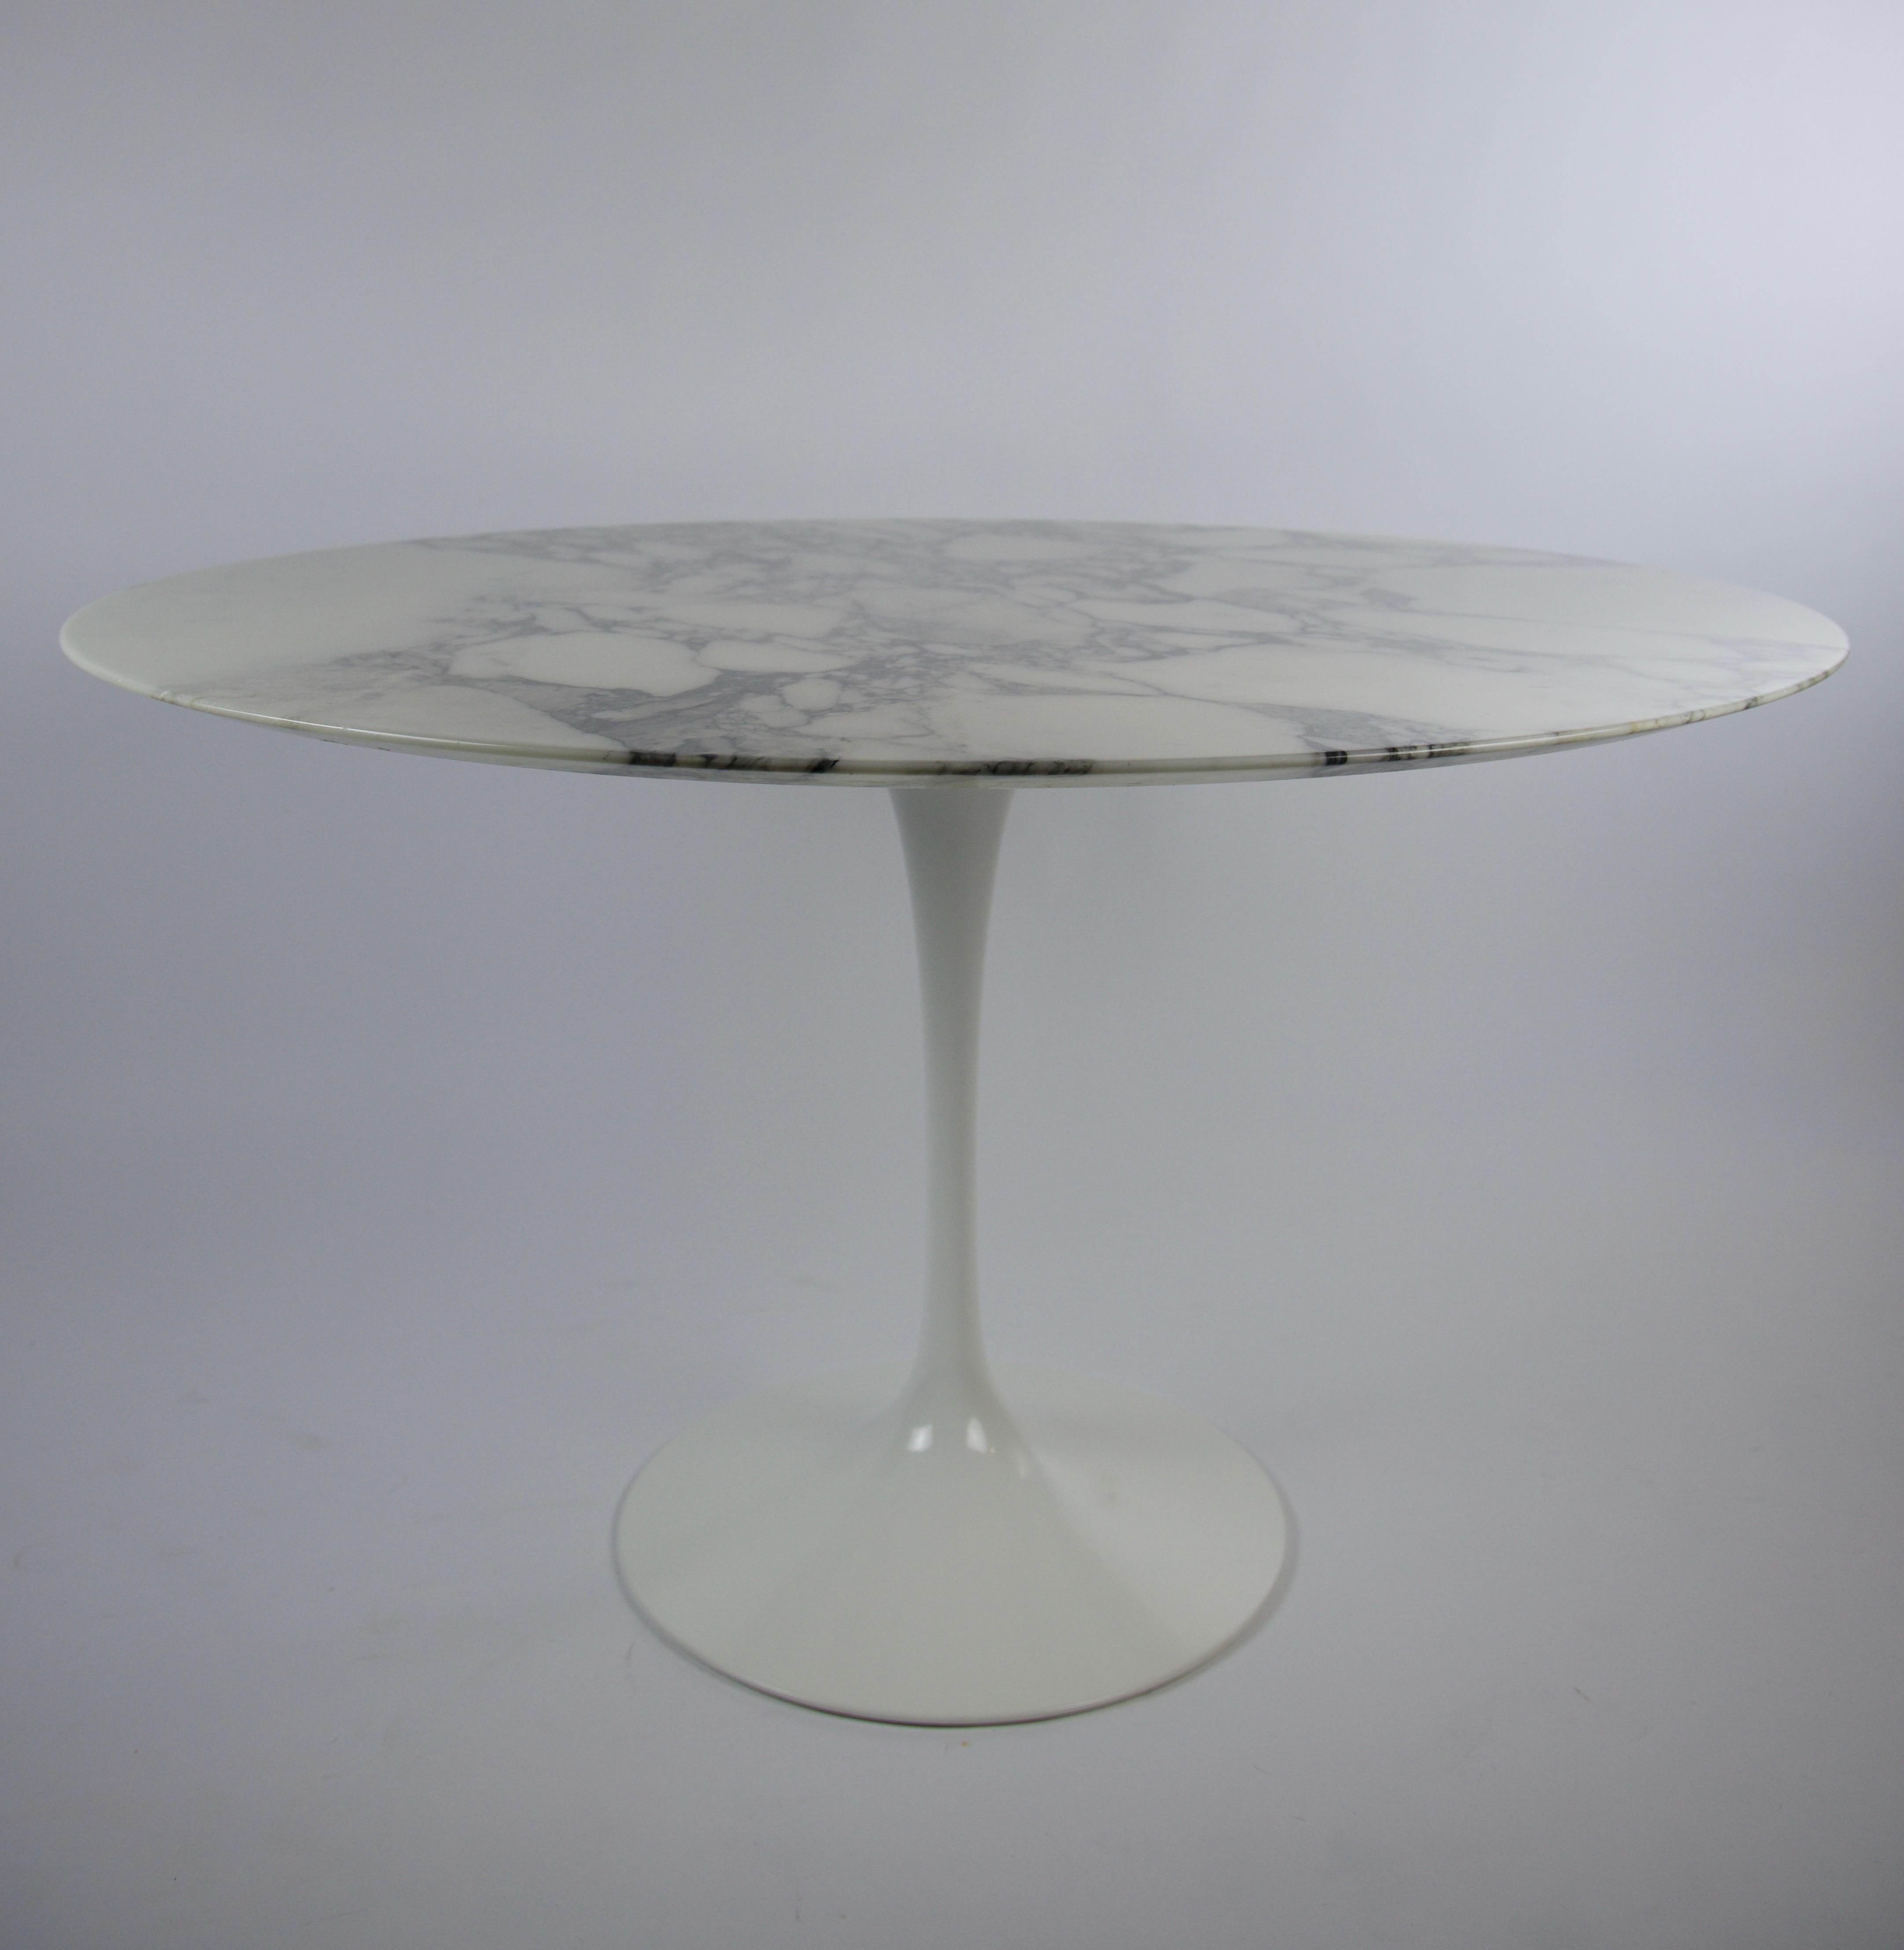 The tulip chairs that were with this table have a tag that has the date 2009. So this is a fairly new Round White Marble Dining Table by Eero Saarinen for Knoll. A few nicks around the edge of the marble. The chairs are also listed Ref: